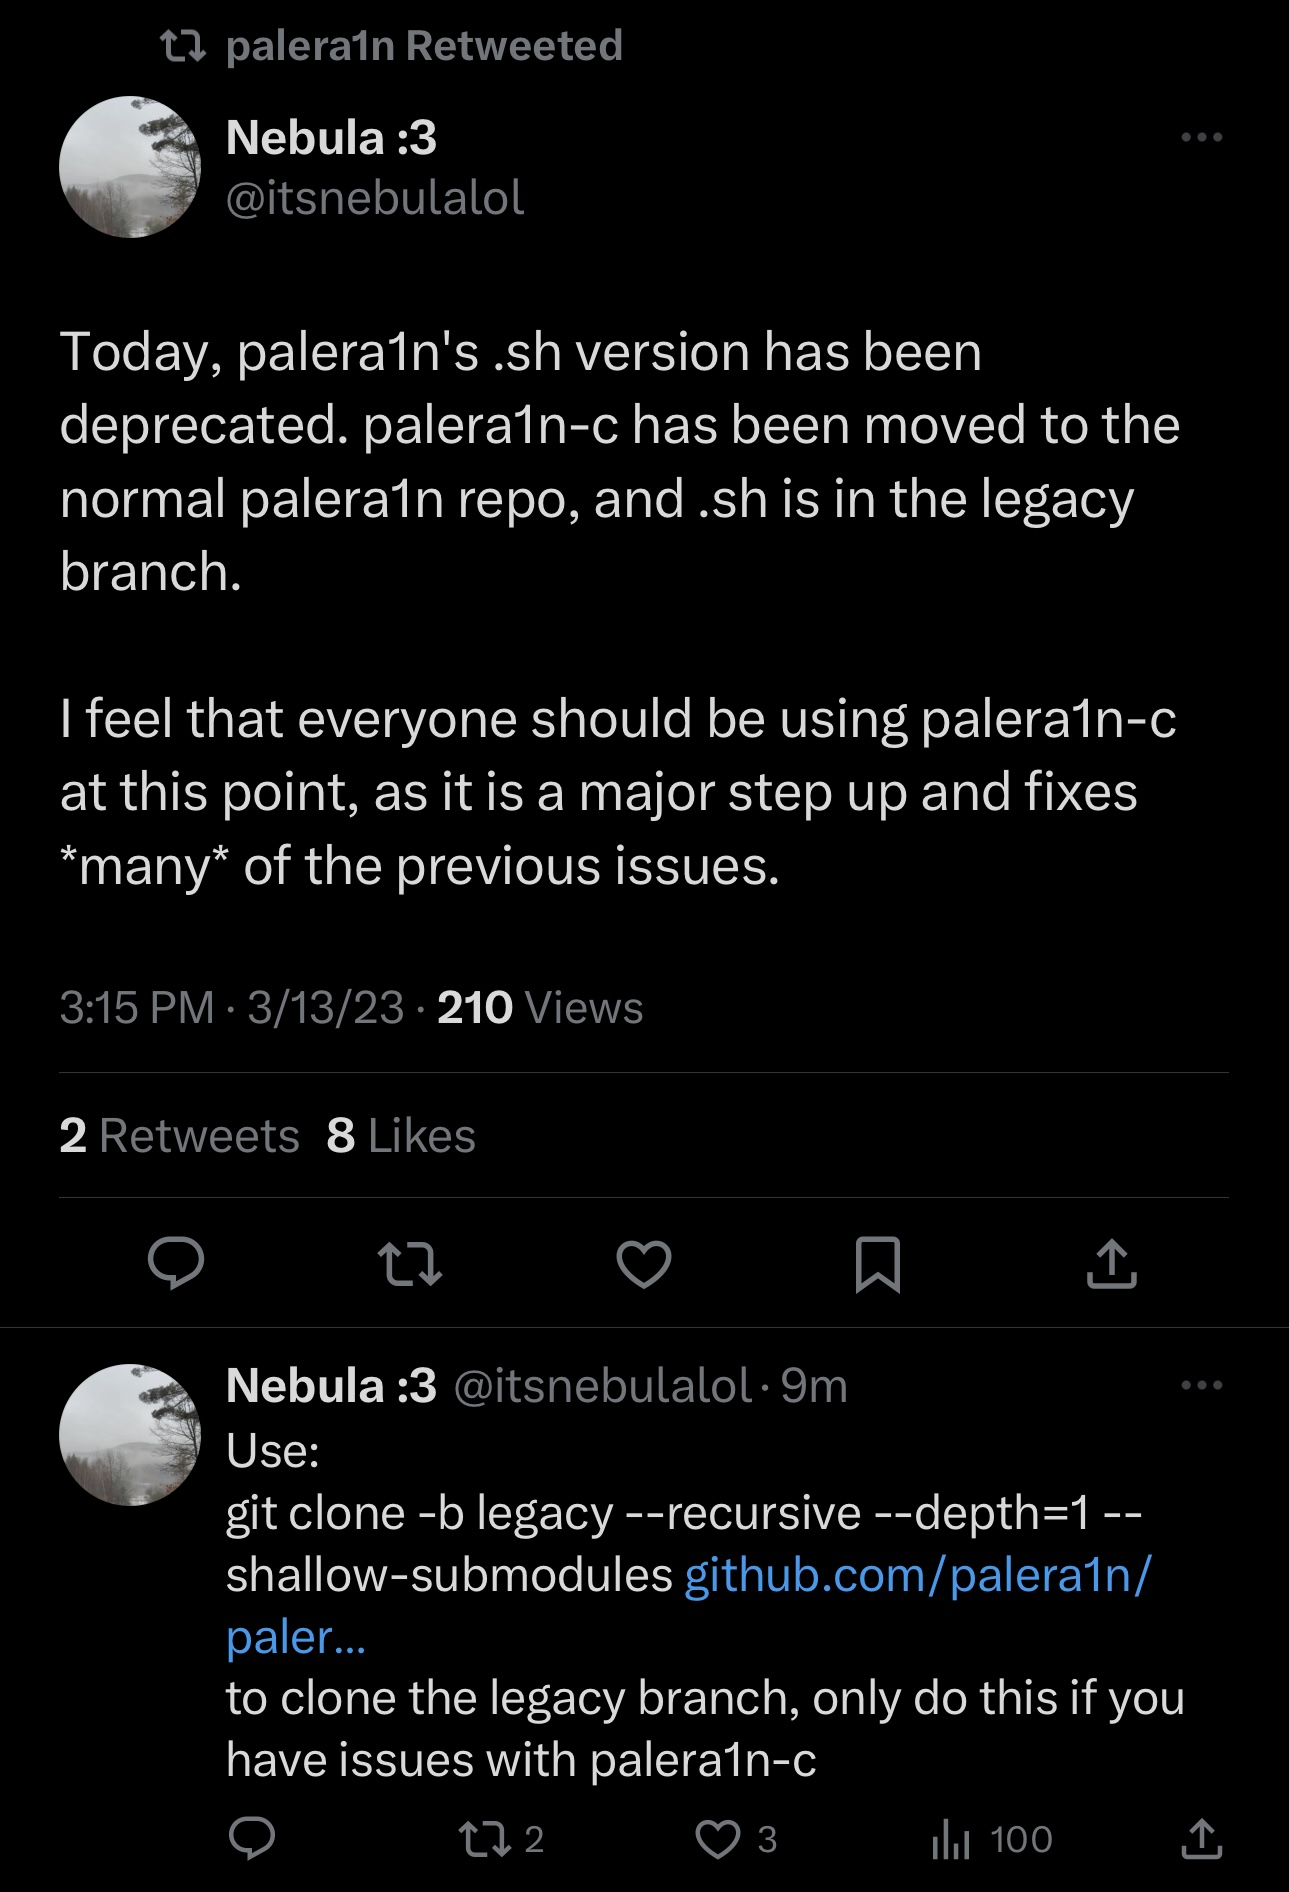 Palera1n-c now recommended over palera1n legacy.